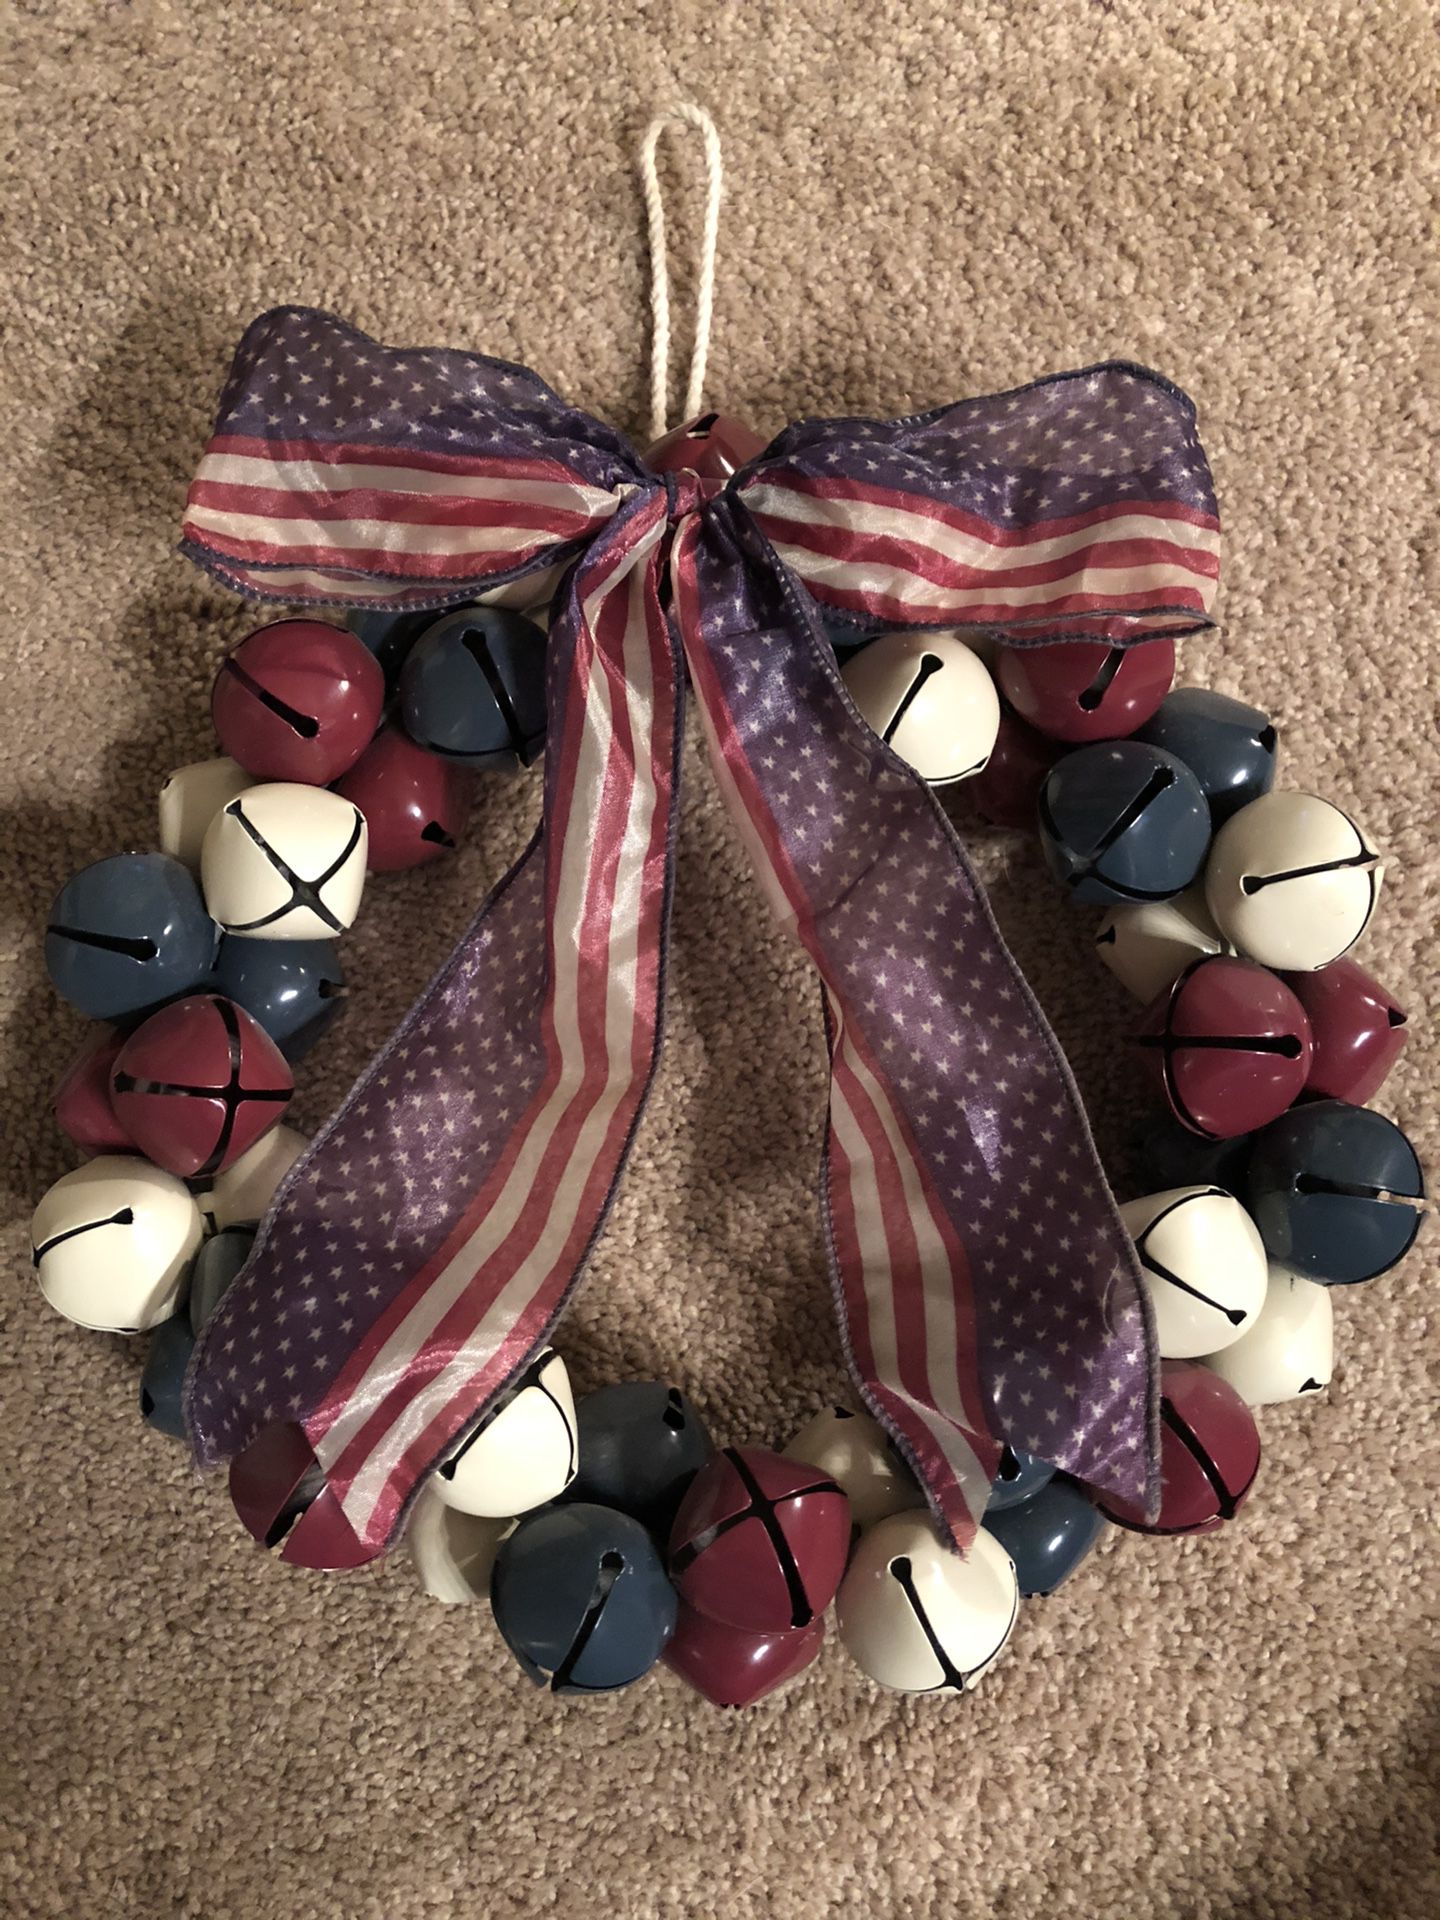 Patriotic Red, White & Blue Wreath made of Bells